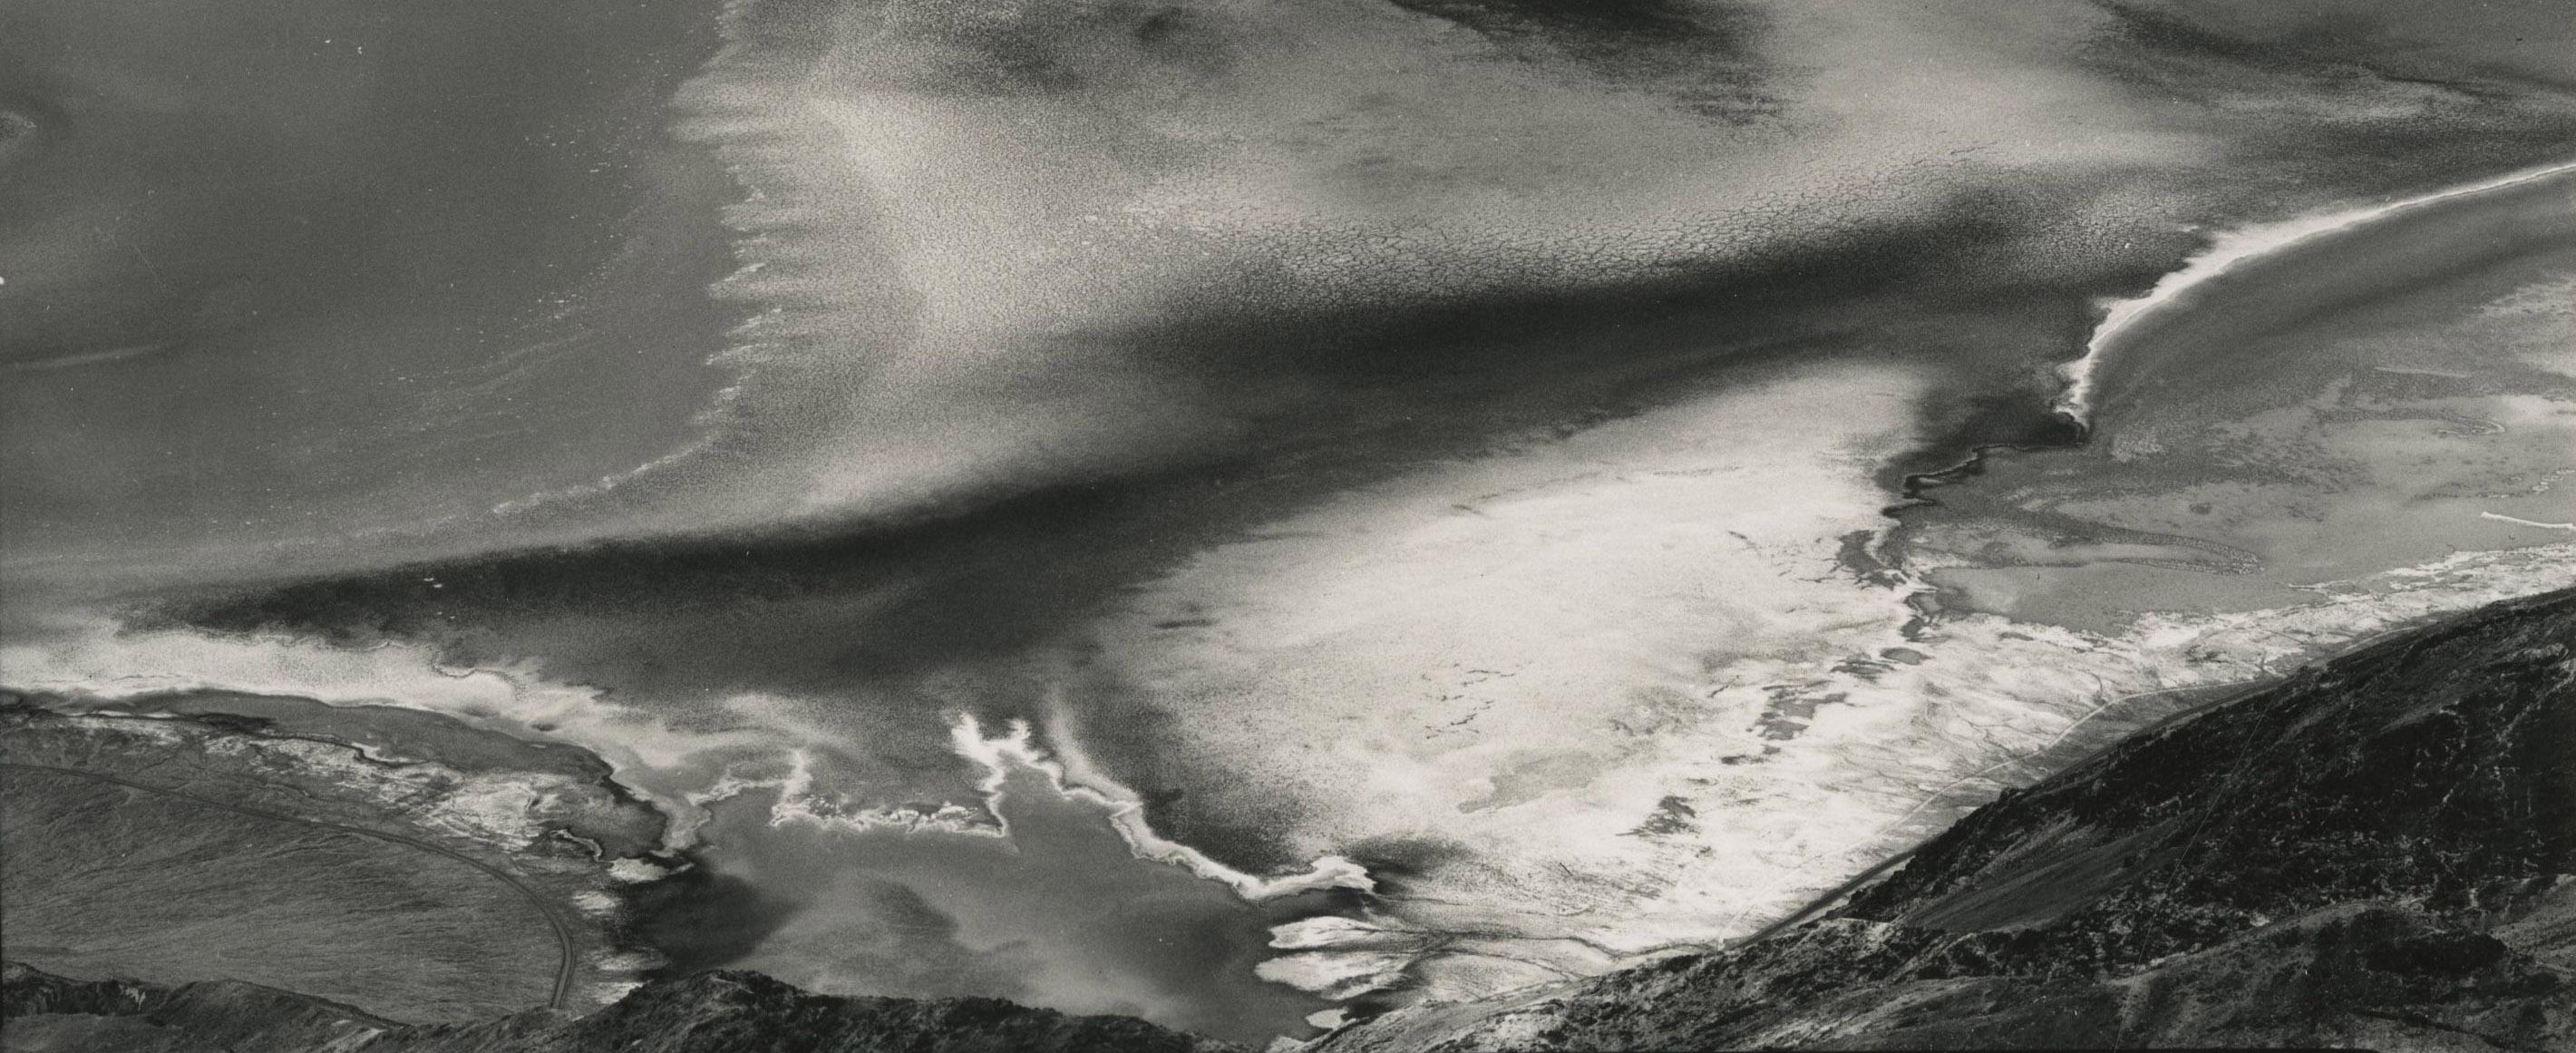 Dante's View, Death Valley - American Modern Photograph by Edward Weston